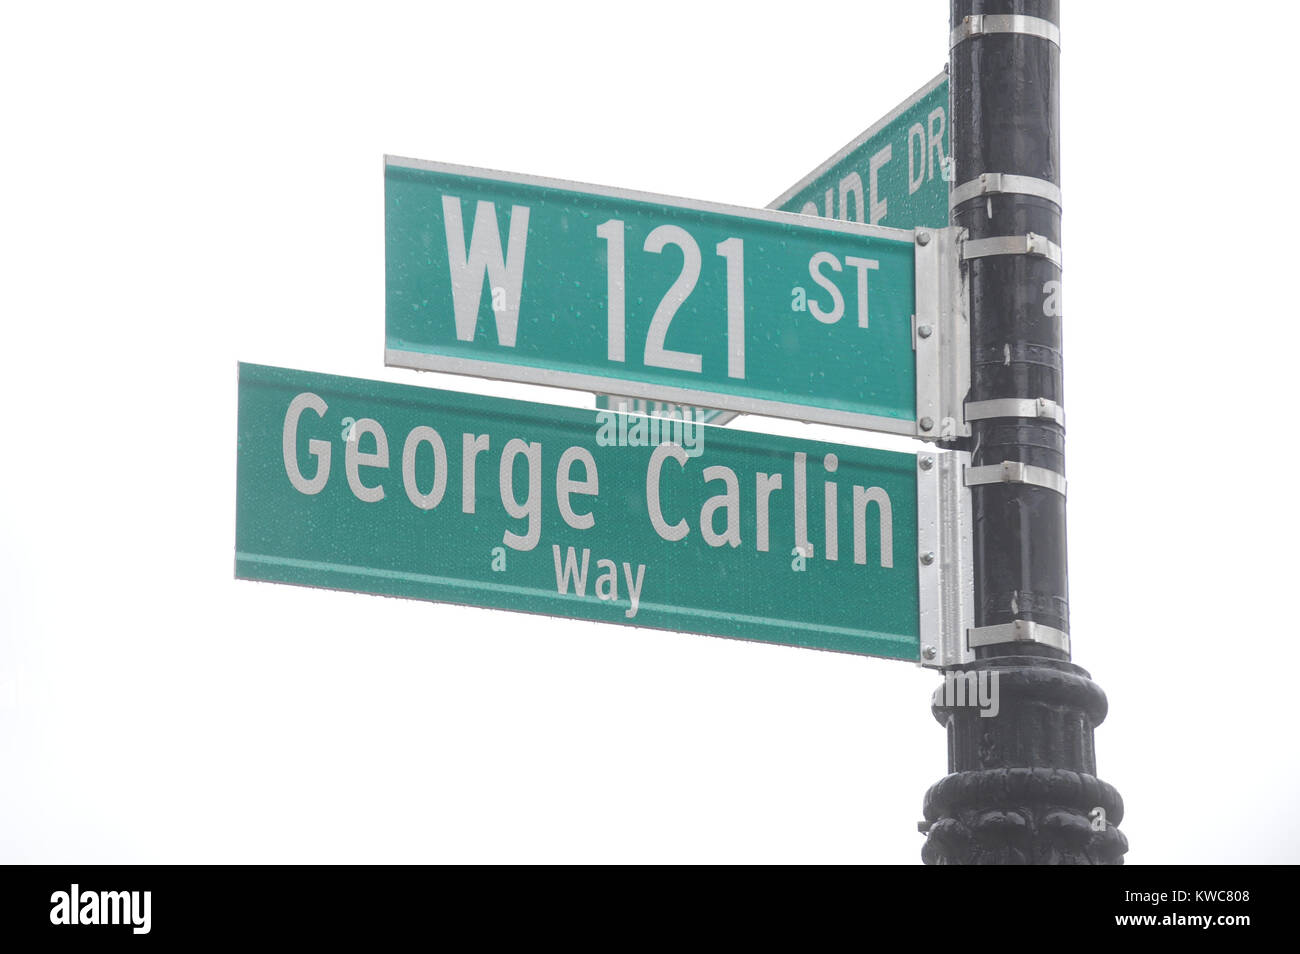 NEW YORK, NY - OCTOBER 22: Al Jones, Colin Quin, George Carlin, George Carlin Way, Gilbert Gottfried, Judah Friedlander, Marla Diamond, Morningside Heights, Robert Klein, and relatives of late stand-up comedian George Carlin mark the renaming of a street as 'George Carlin Way' at Morningside Avenue and 121st Street on October 22, 2014 in New York City.  People:  George Carlin Way Stock Photo